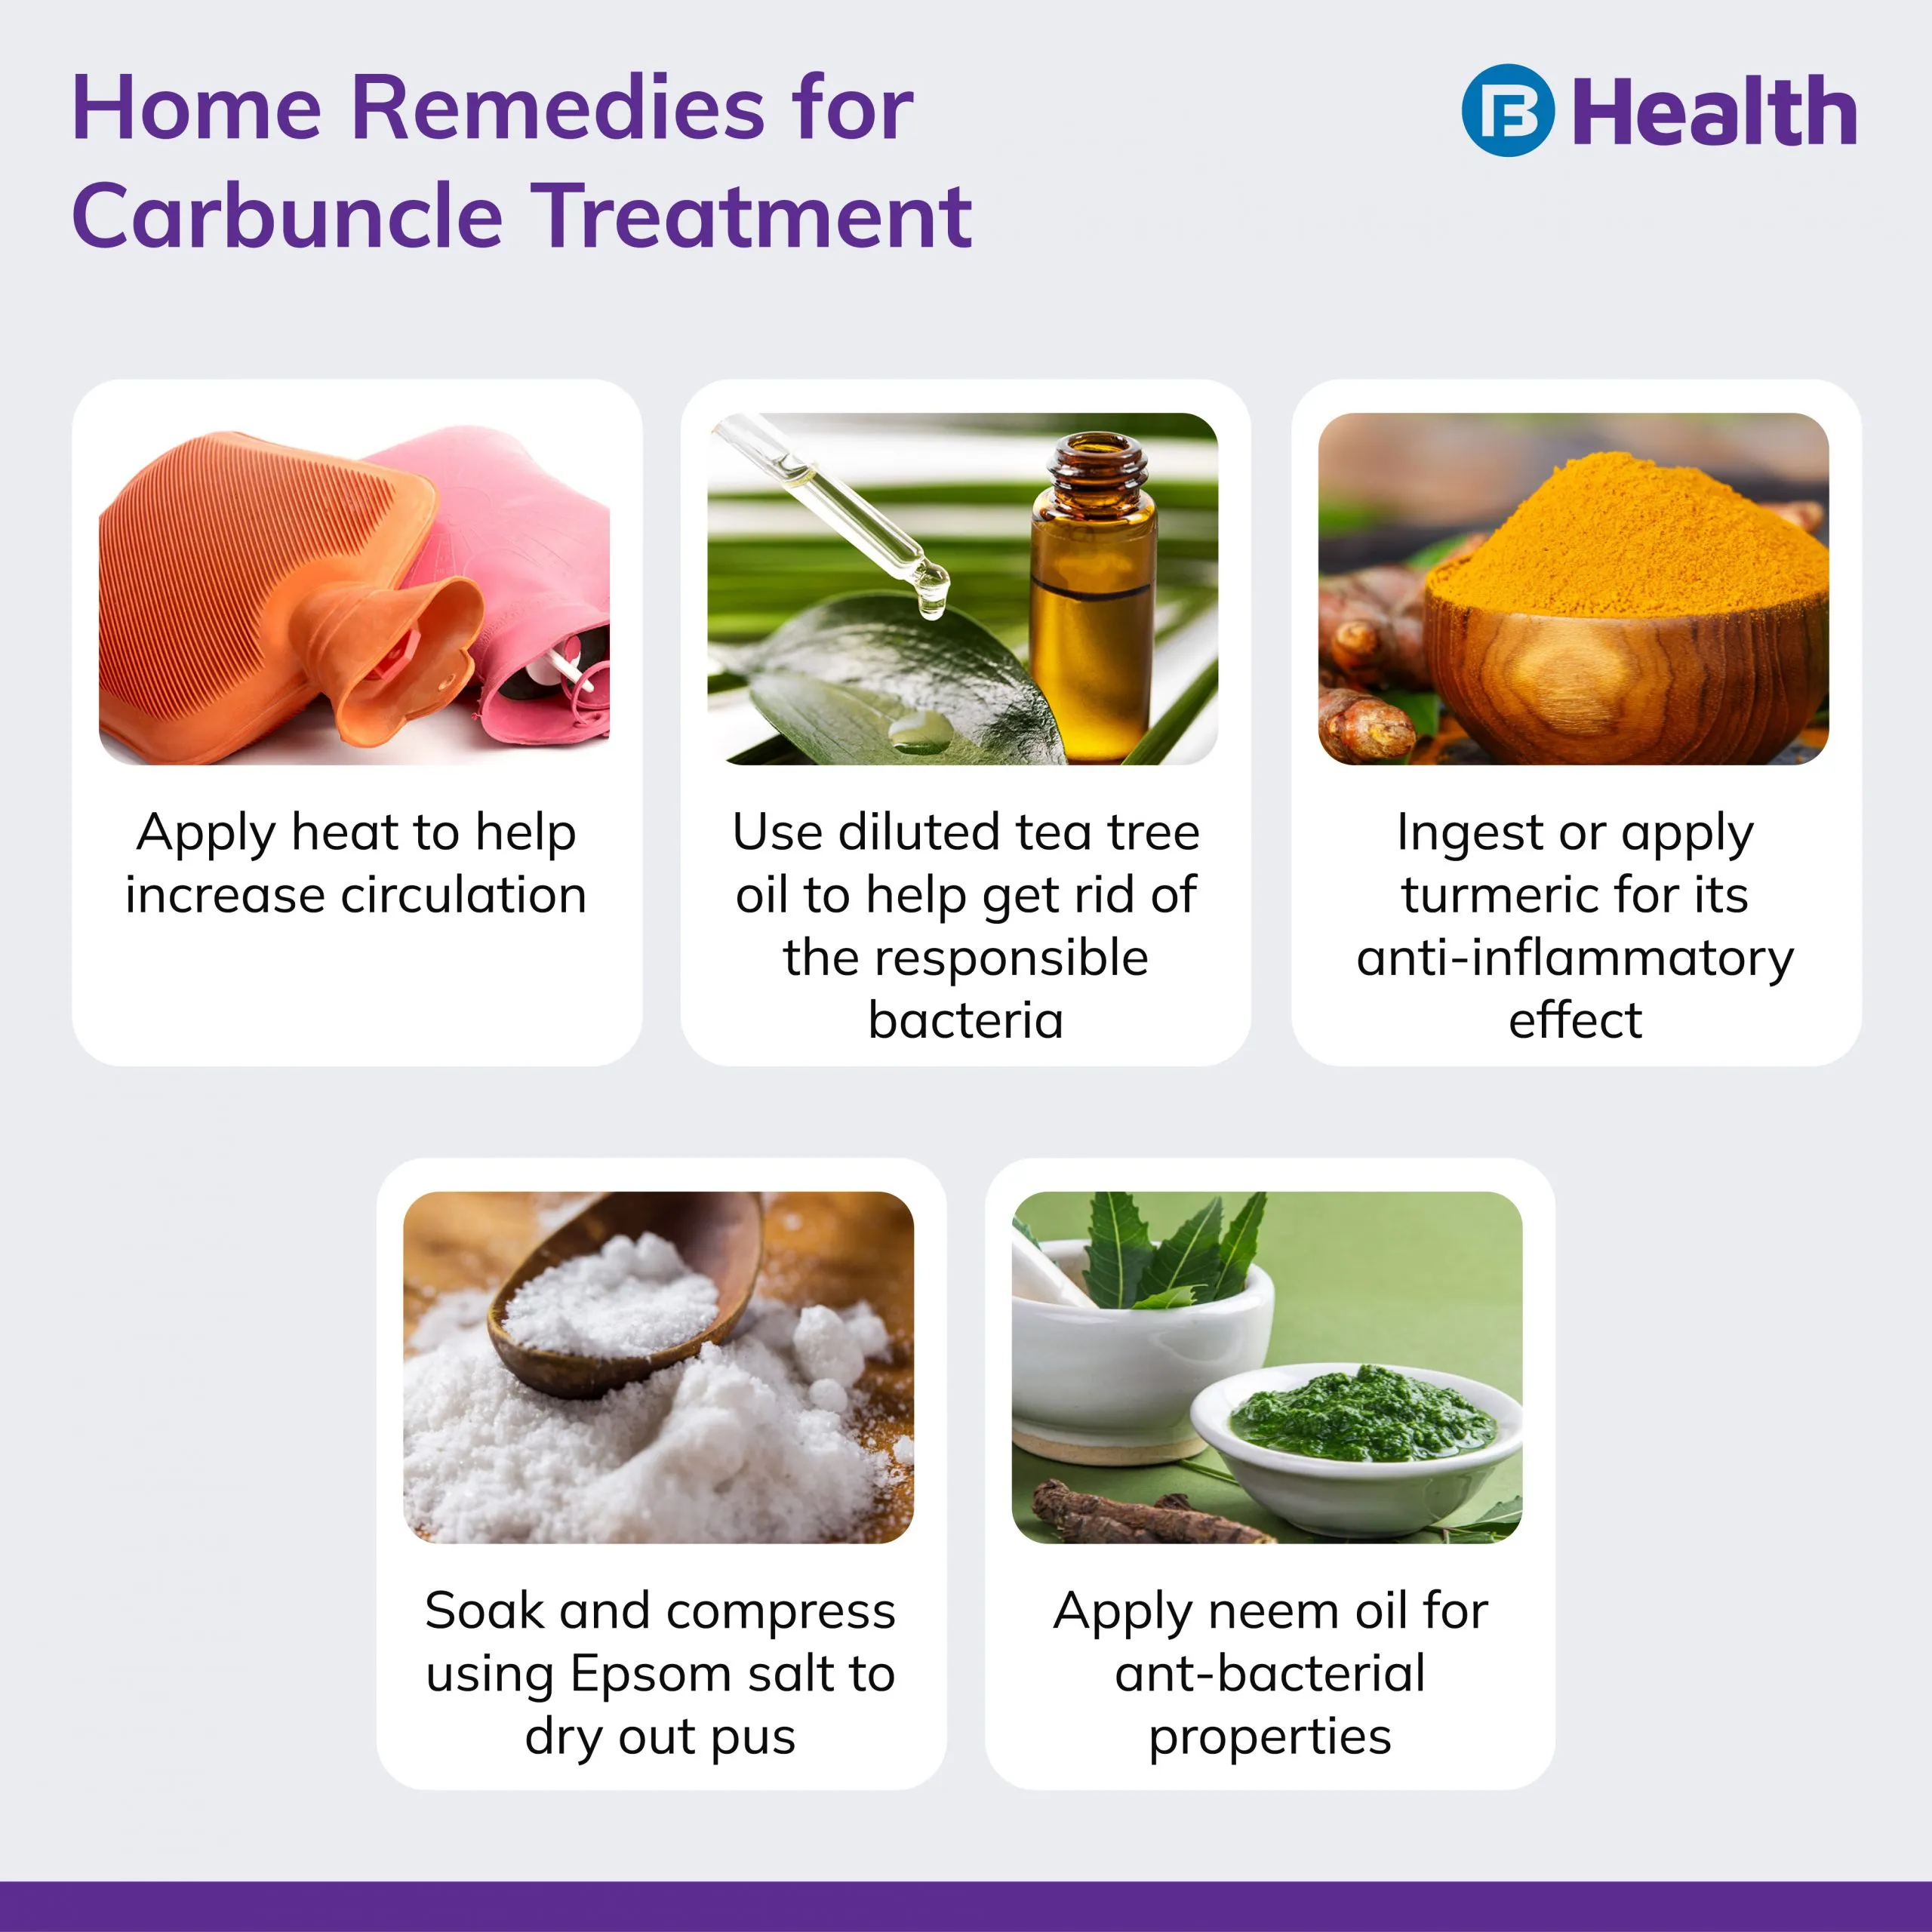 home remedies for Carbuncle Treatment Infographic